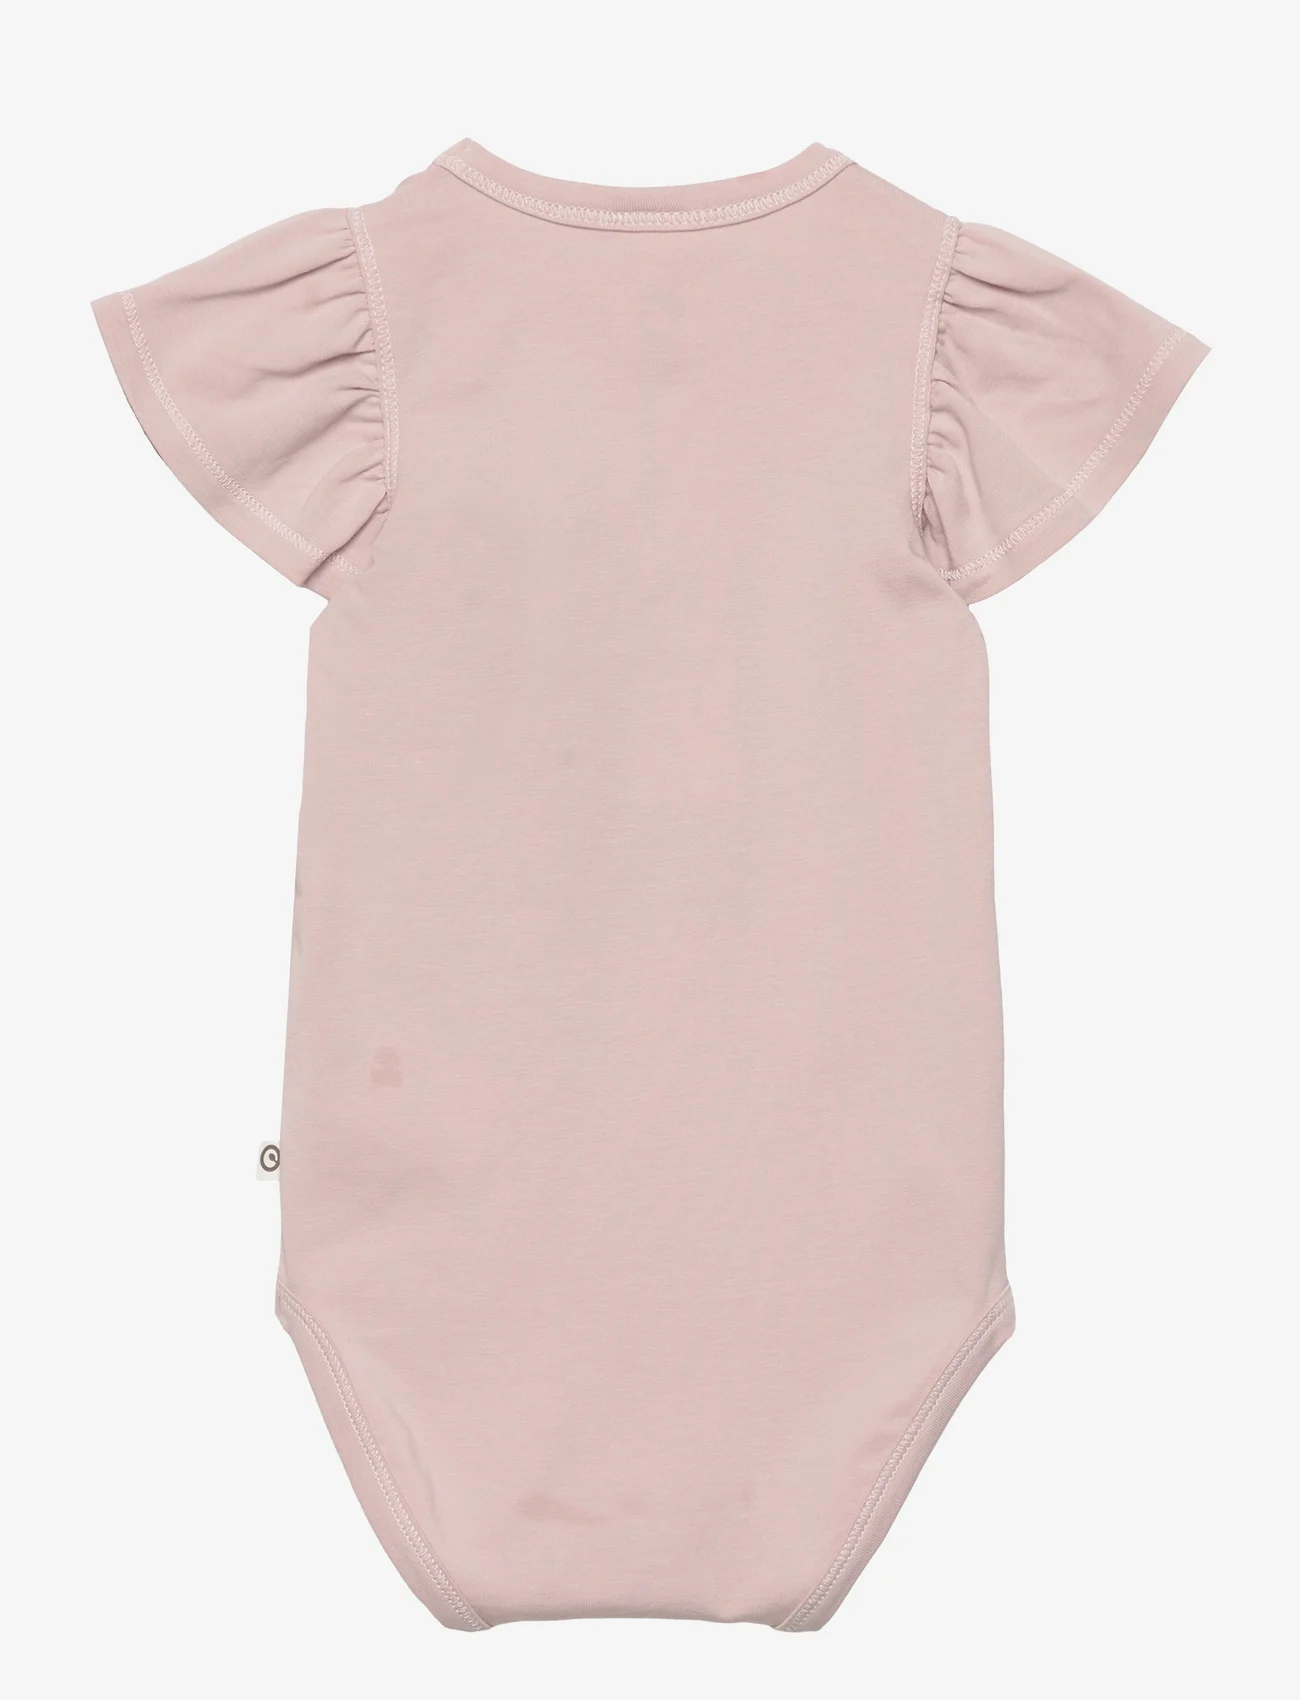 Müsli by Green Cotton - Cozy me frill s/s body - rose moon - 1